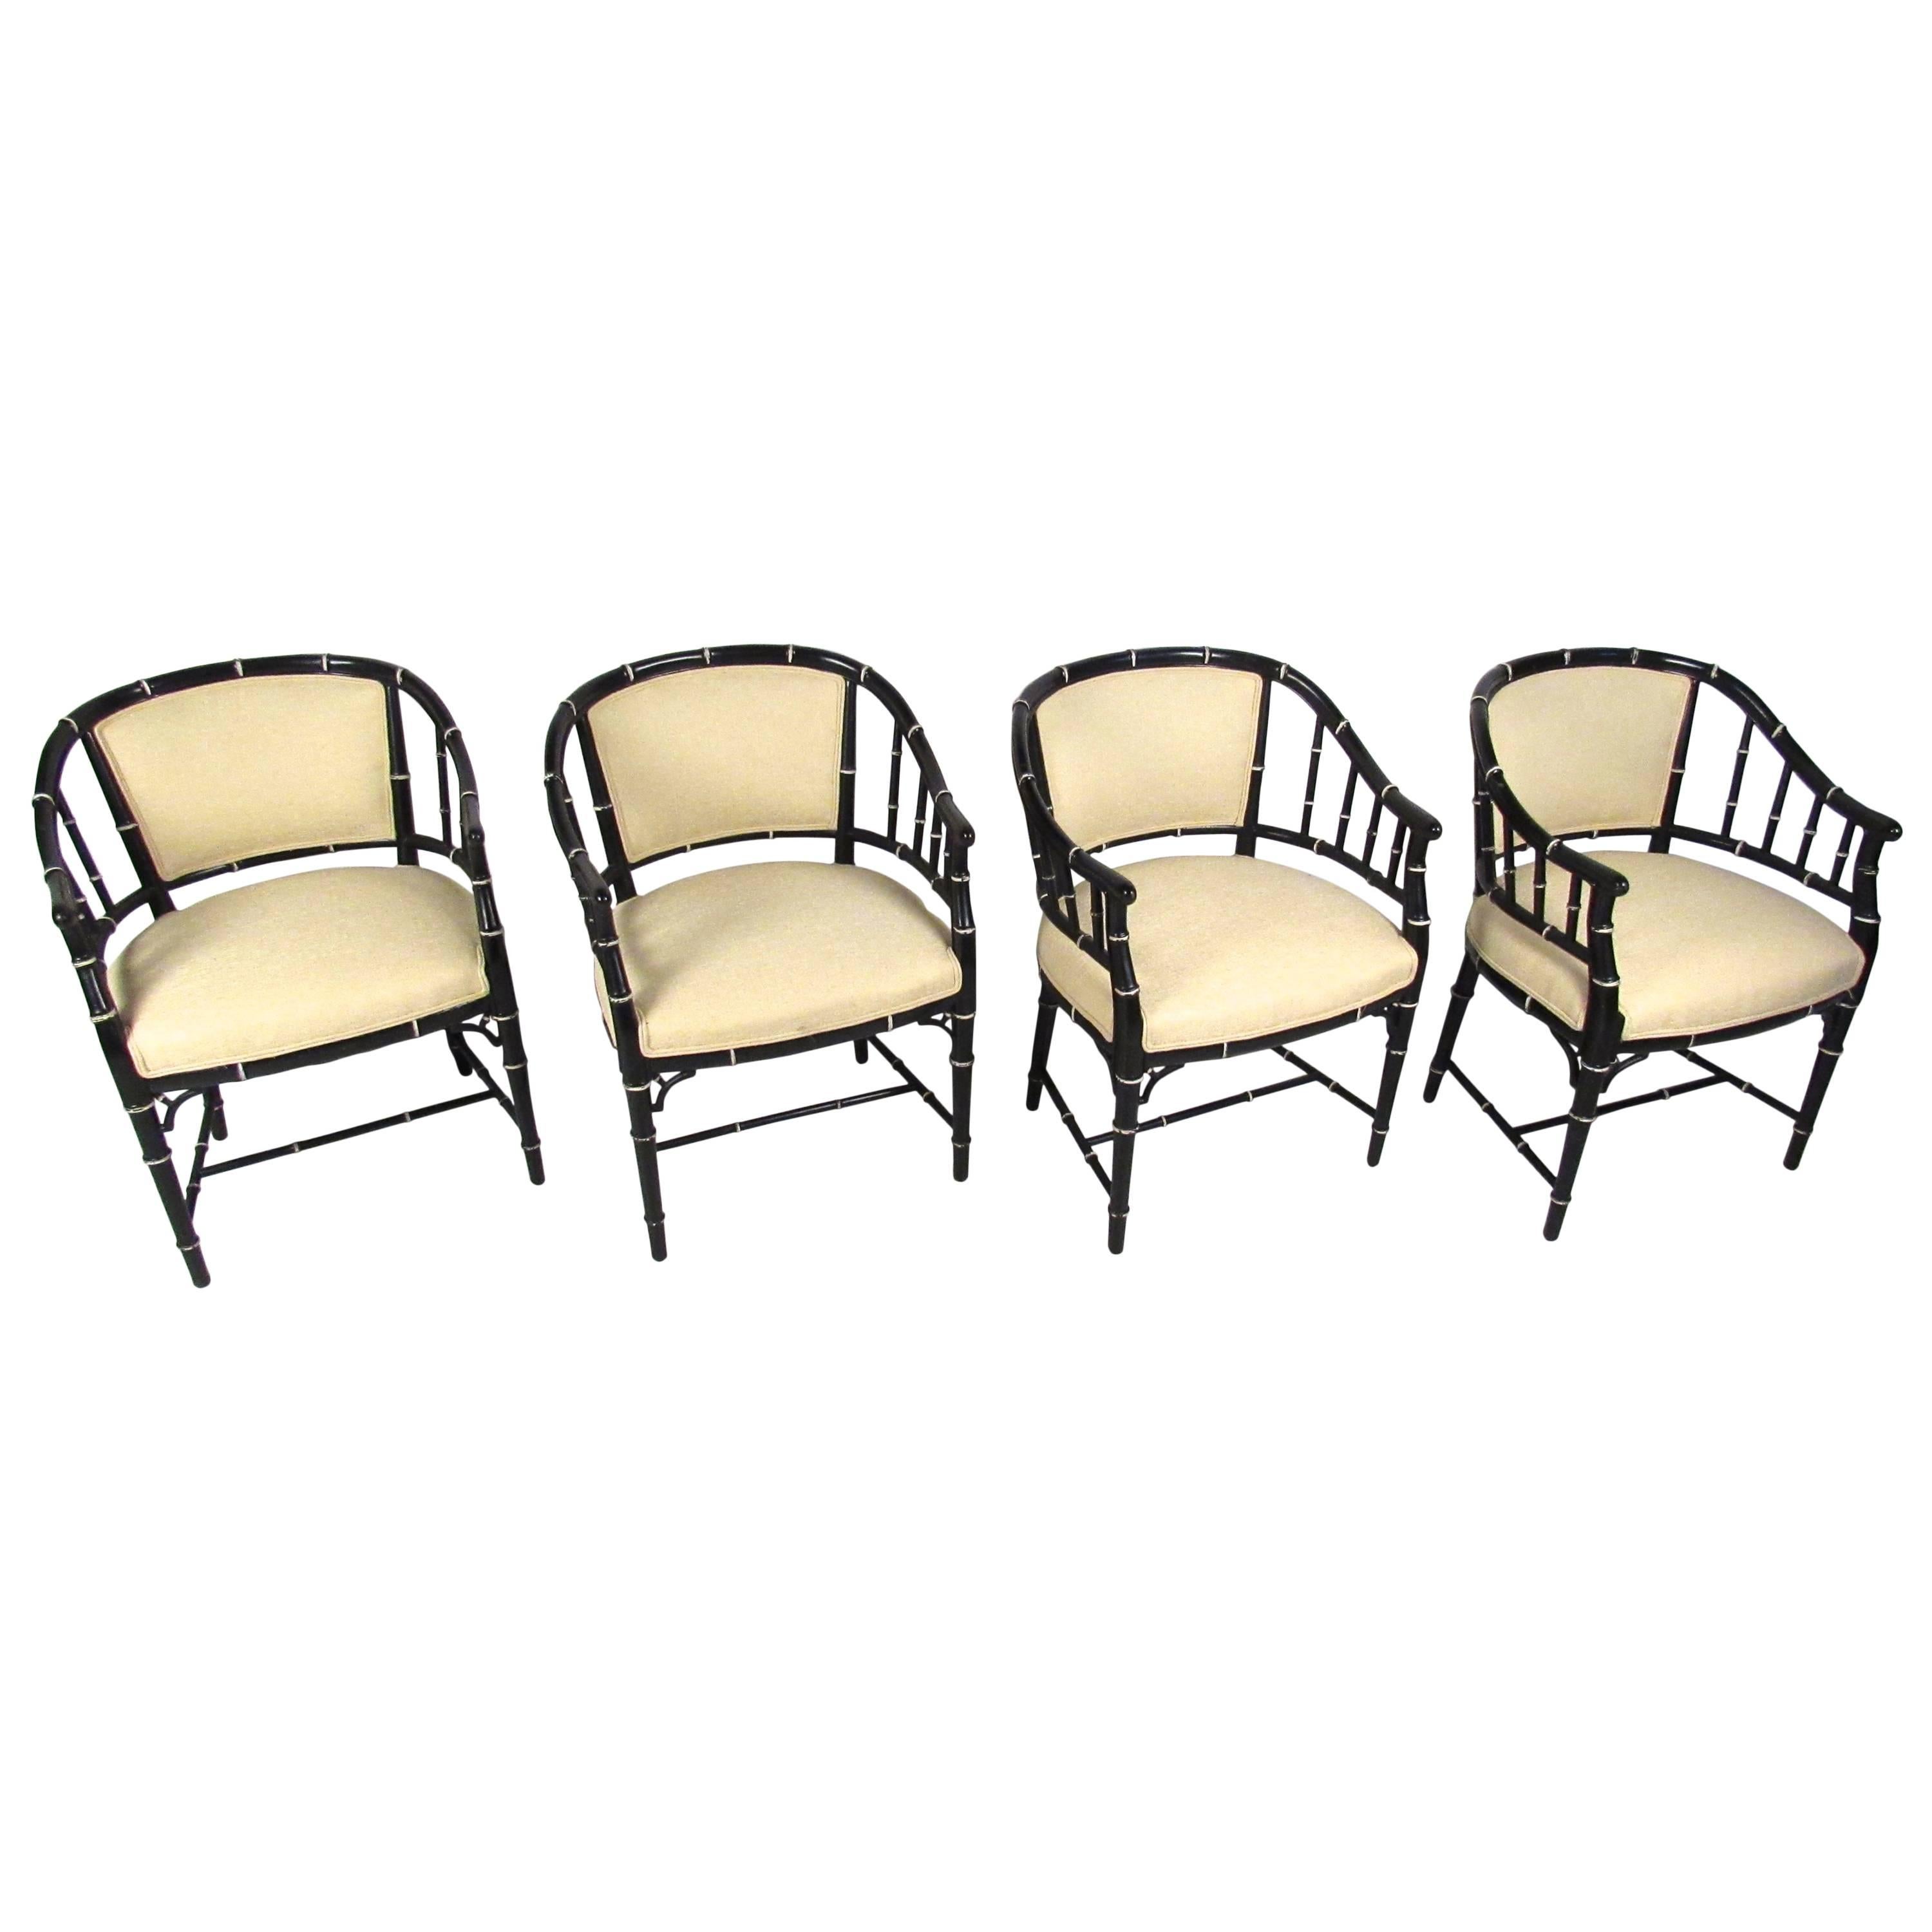 Set of Mid-Century Modern Bamboo Style Dining Chairs